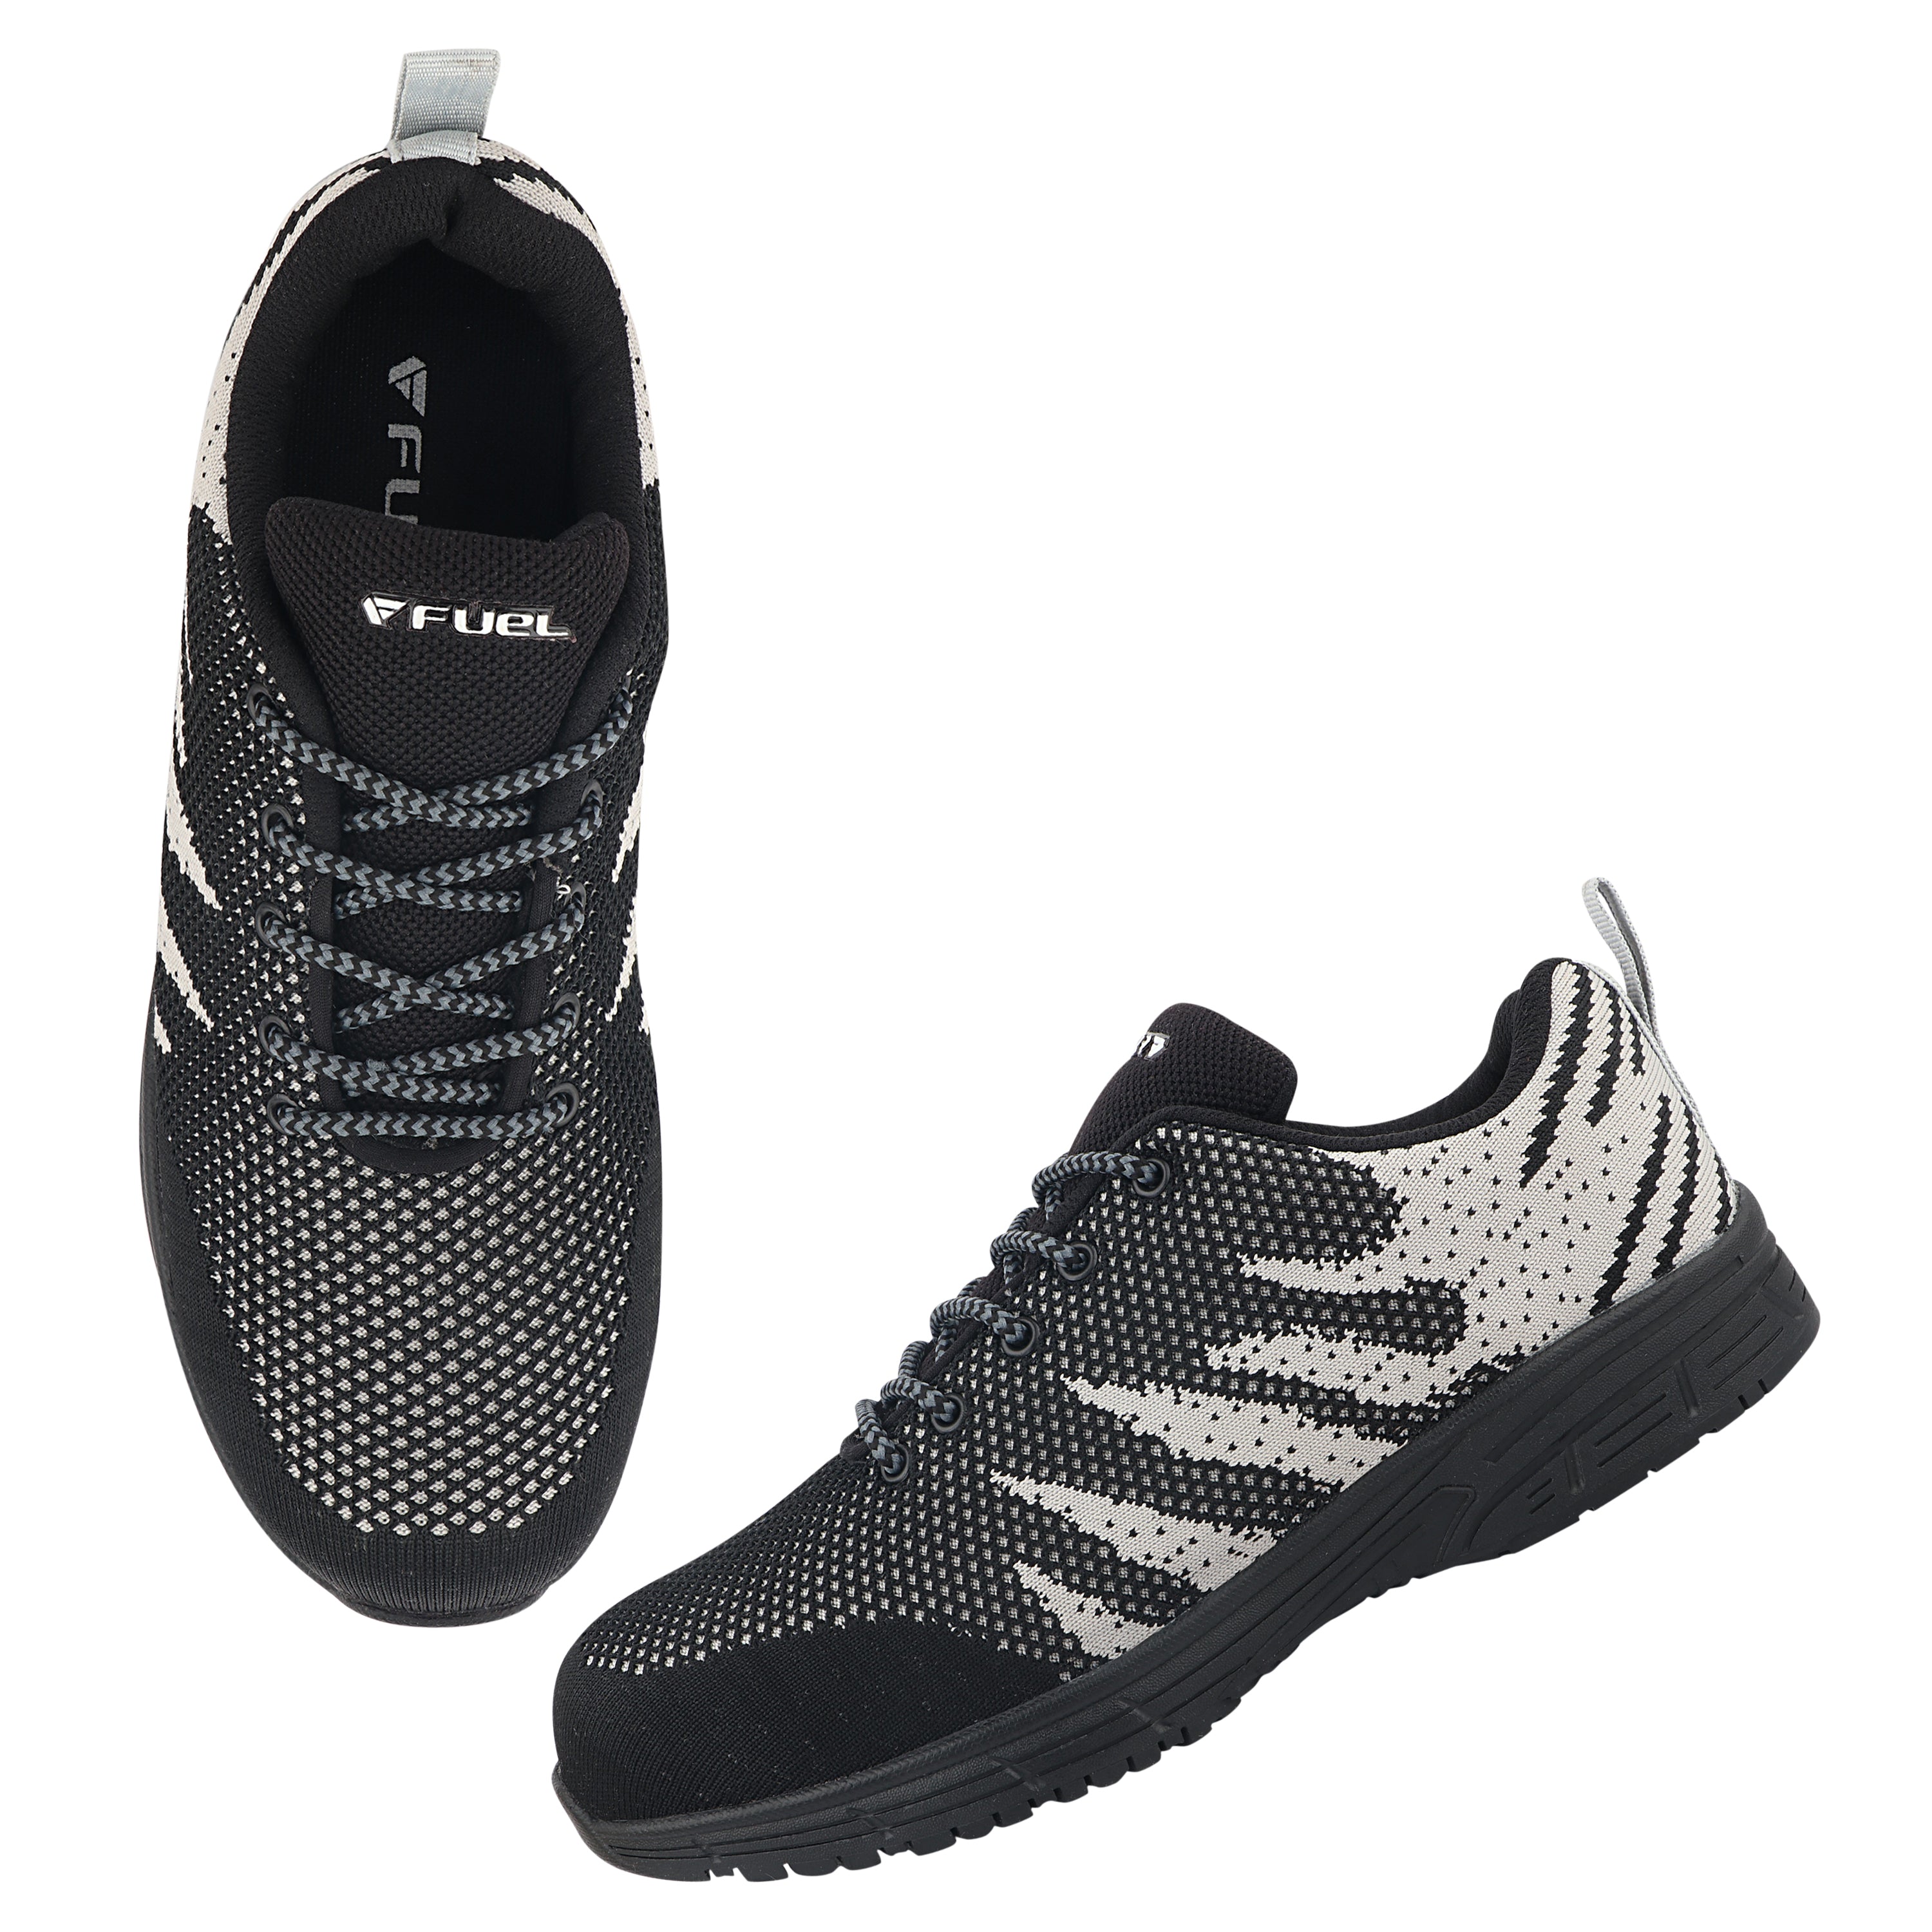 Fuel Gracy Sporty Design Knitted Fabric Breathable Mesh Lining Safety Shoes for Men's Steel Toe Cap With Rubber Sole (Blk-Grey)